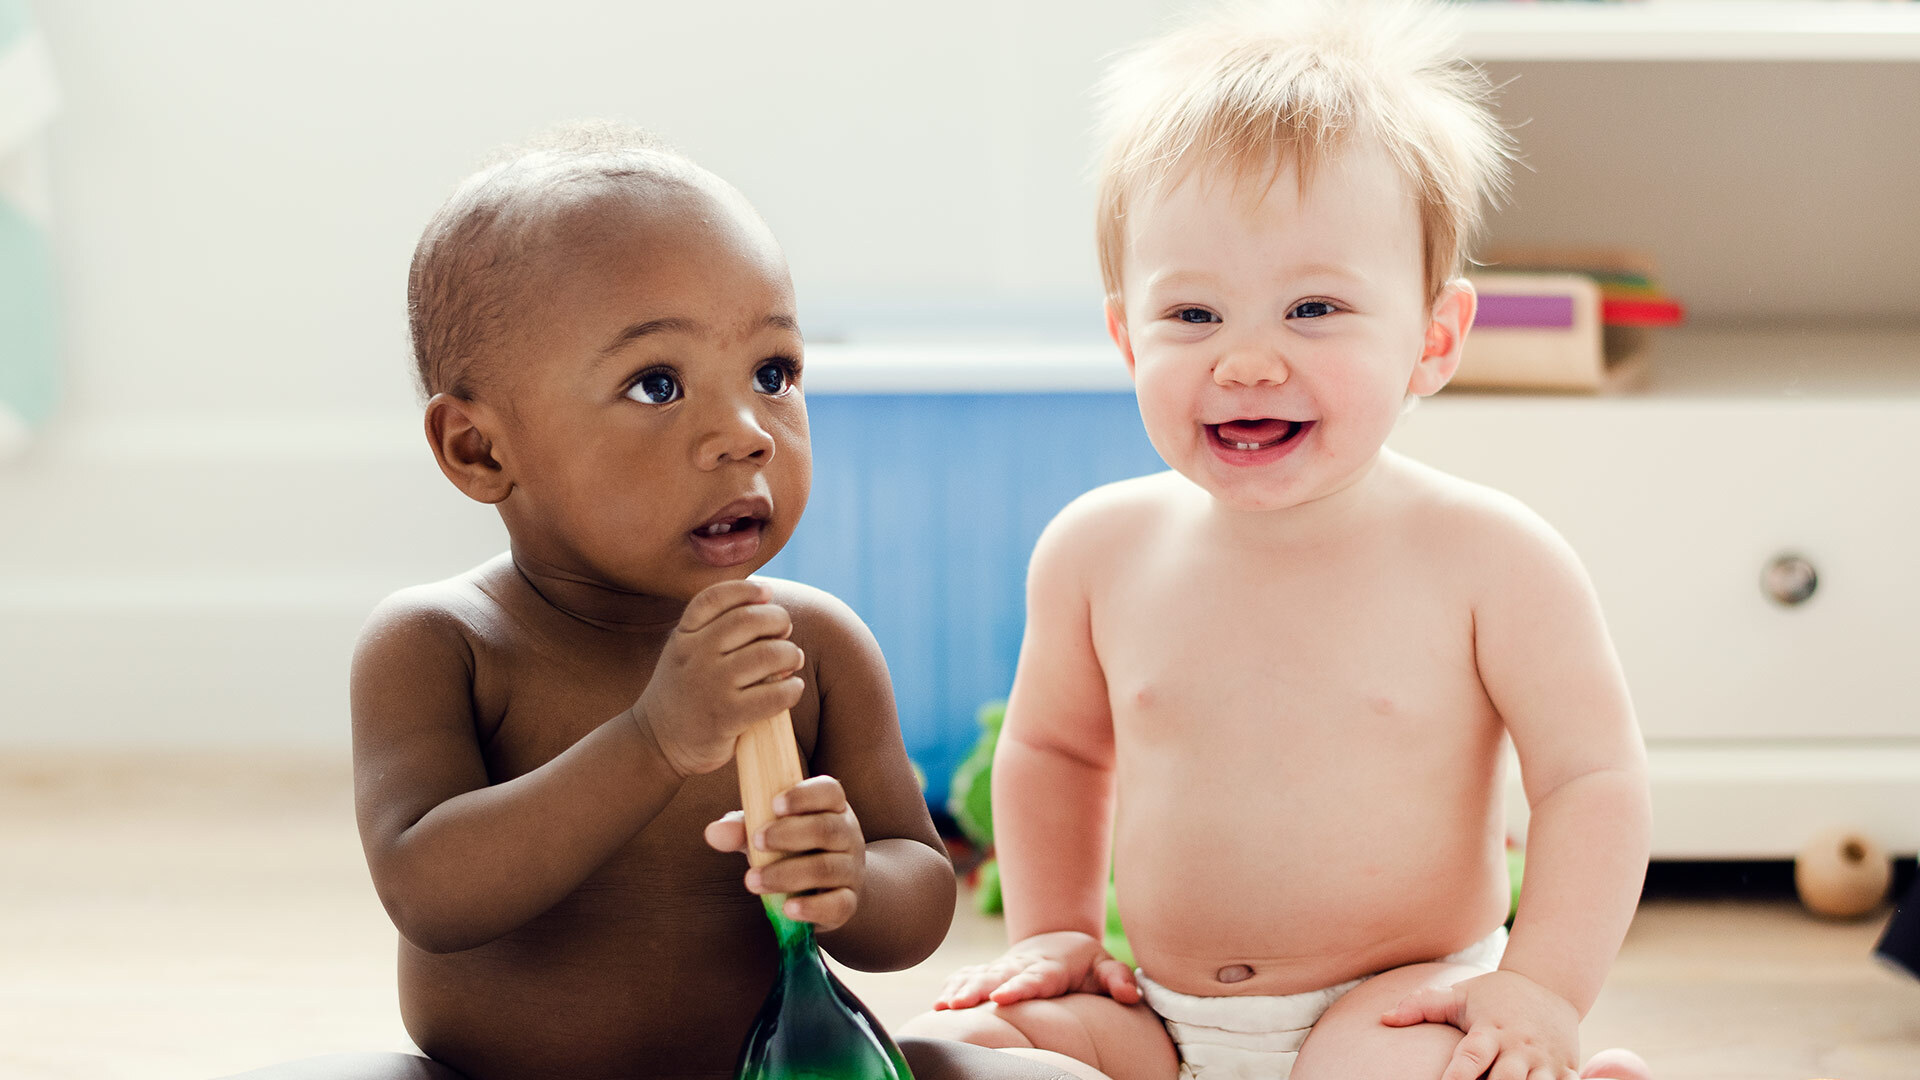 The University of Maryland has been chosen as one of 25 institutions across the country to implement the HEALthy Brain and Child Development study, a multi-year project that will recruit a diverse cohort of pregnant people and follow them and their children into early childhood. (Photo by iStock)